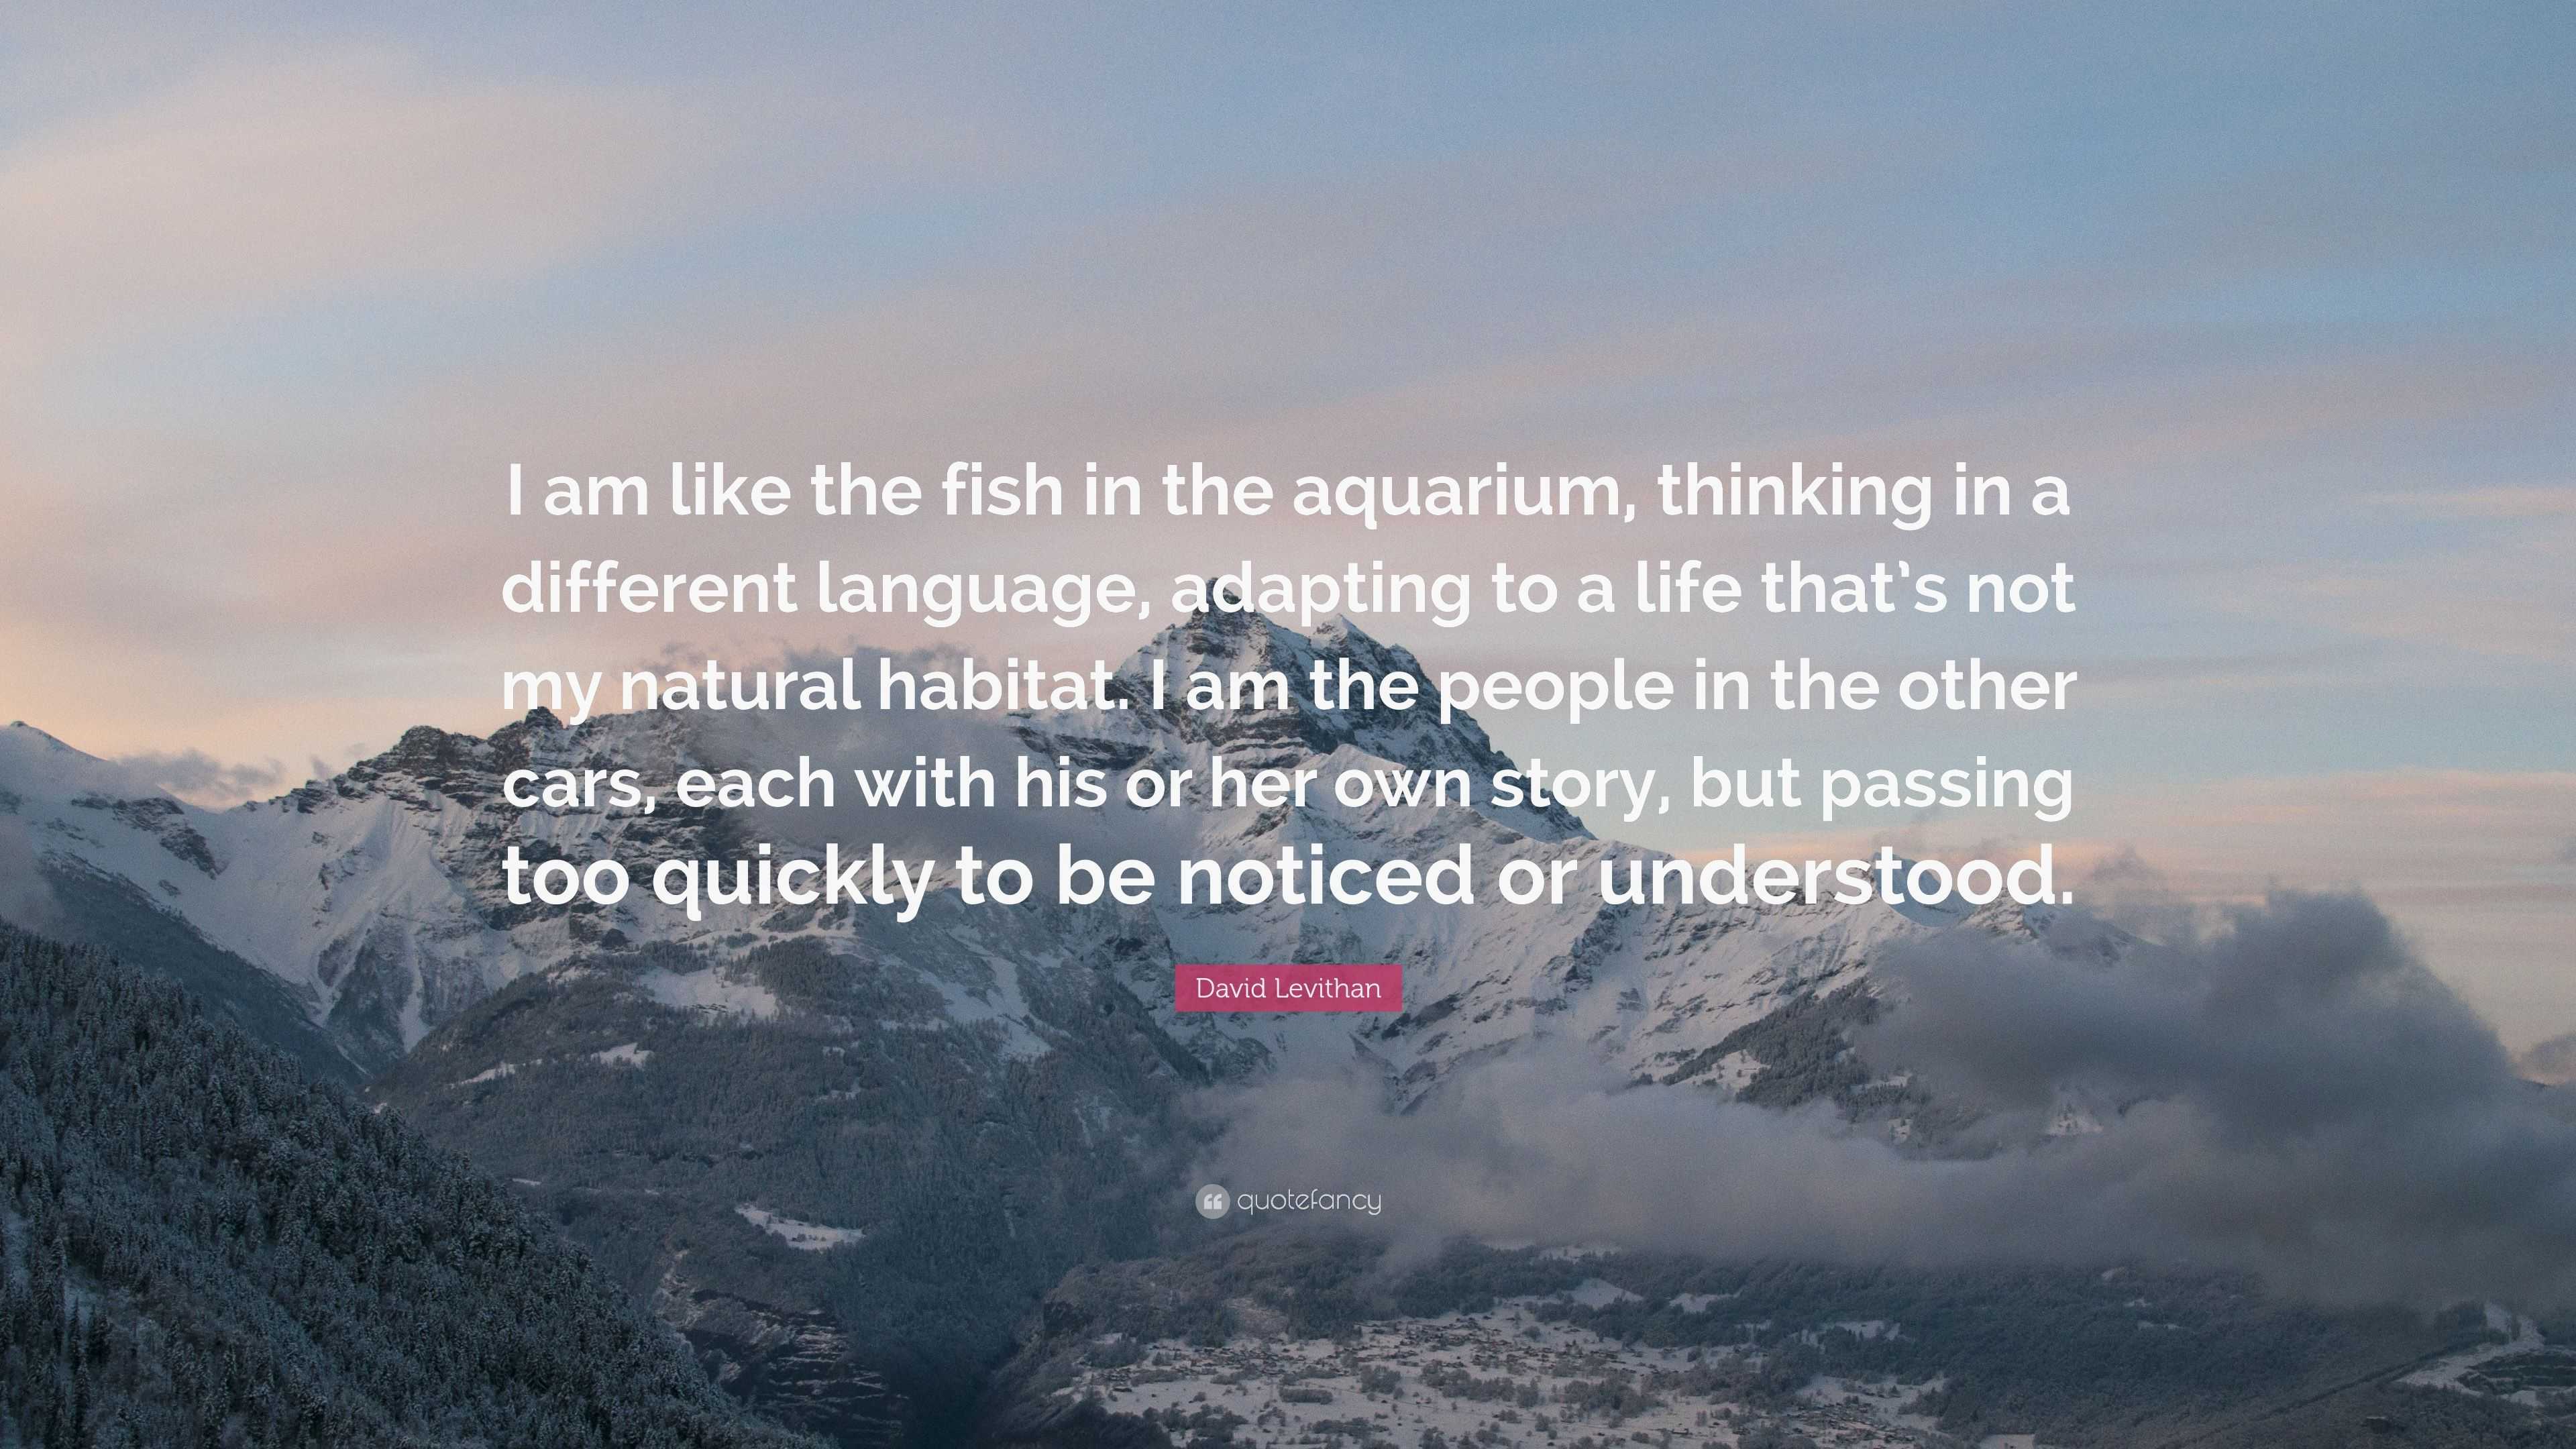 David Levithan Quote “I am like the fish in the aquarium thinking in